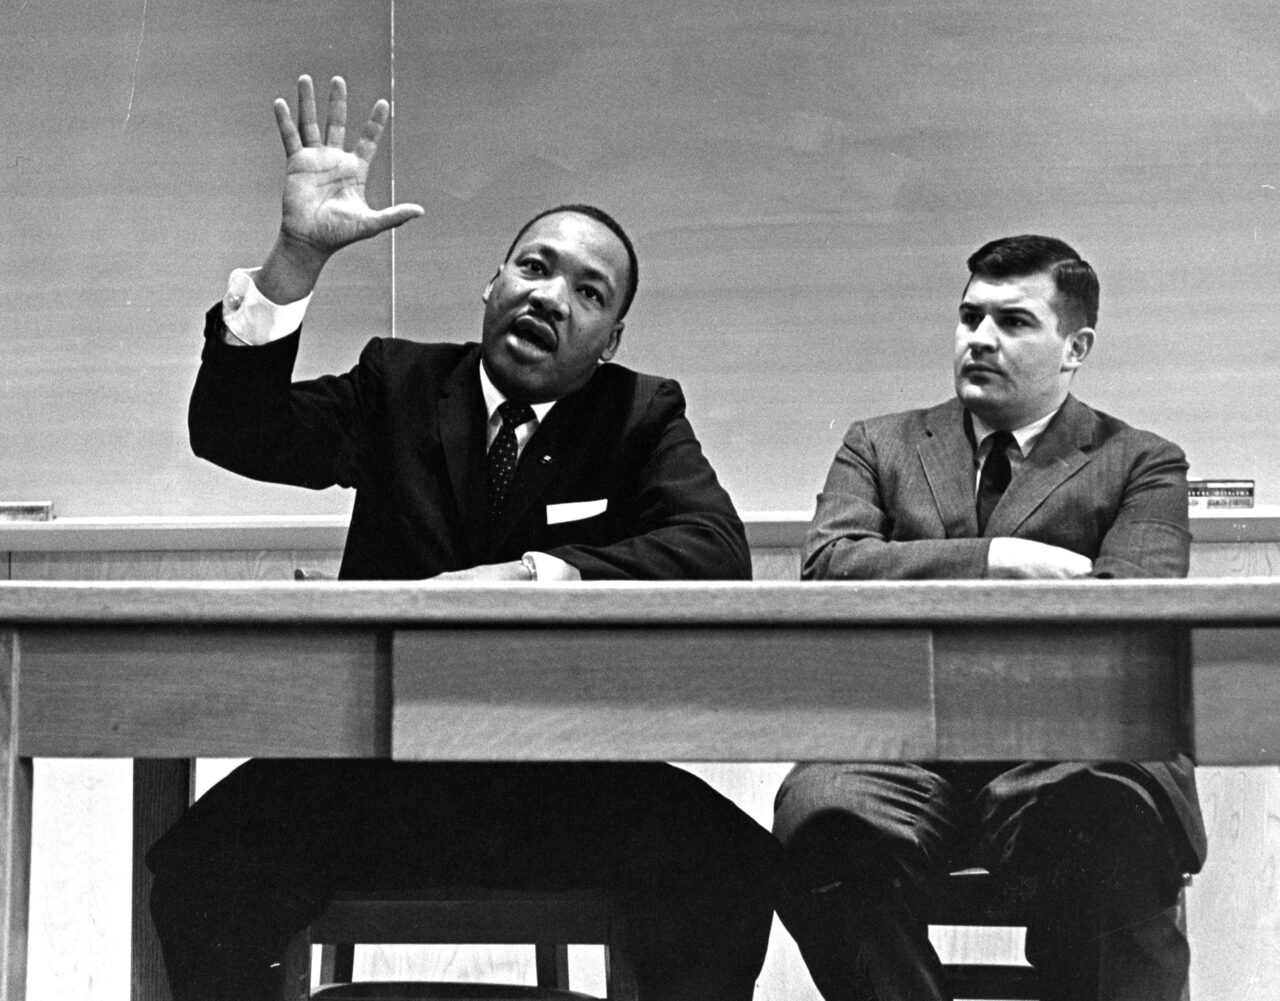 057 - Photo, Martin Luther King hand raised, sitting with John Maguire at desk in a classroom